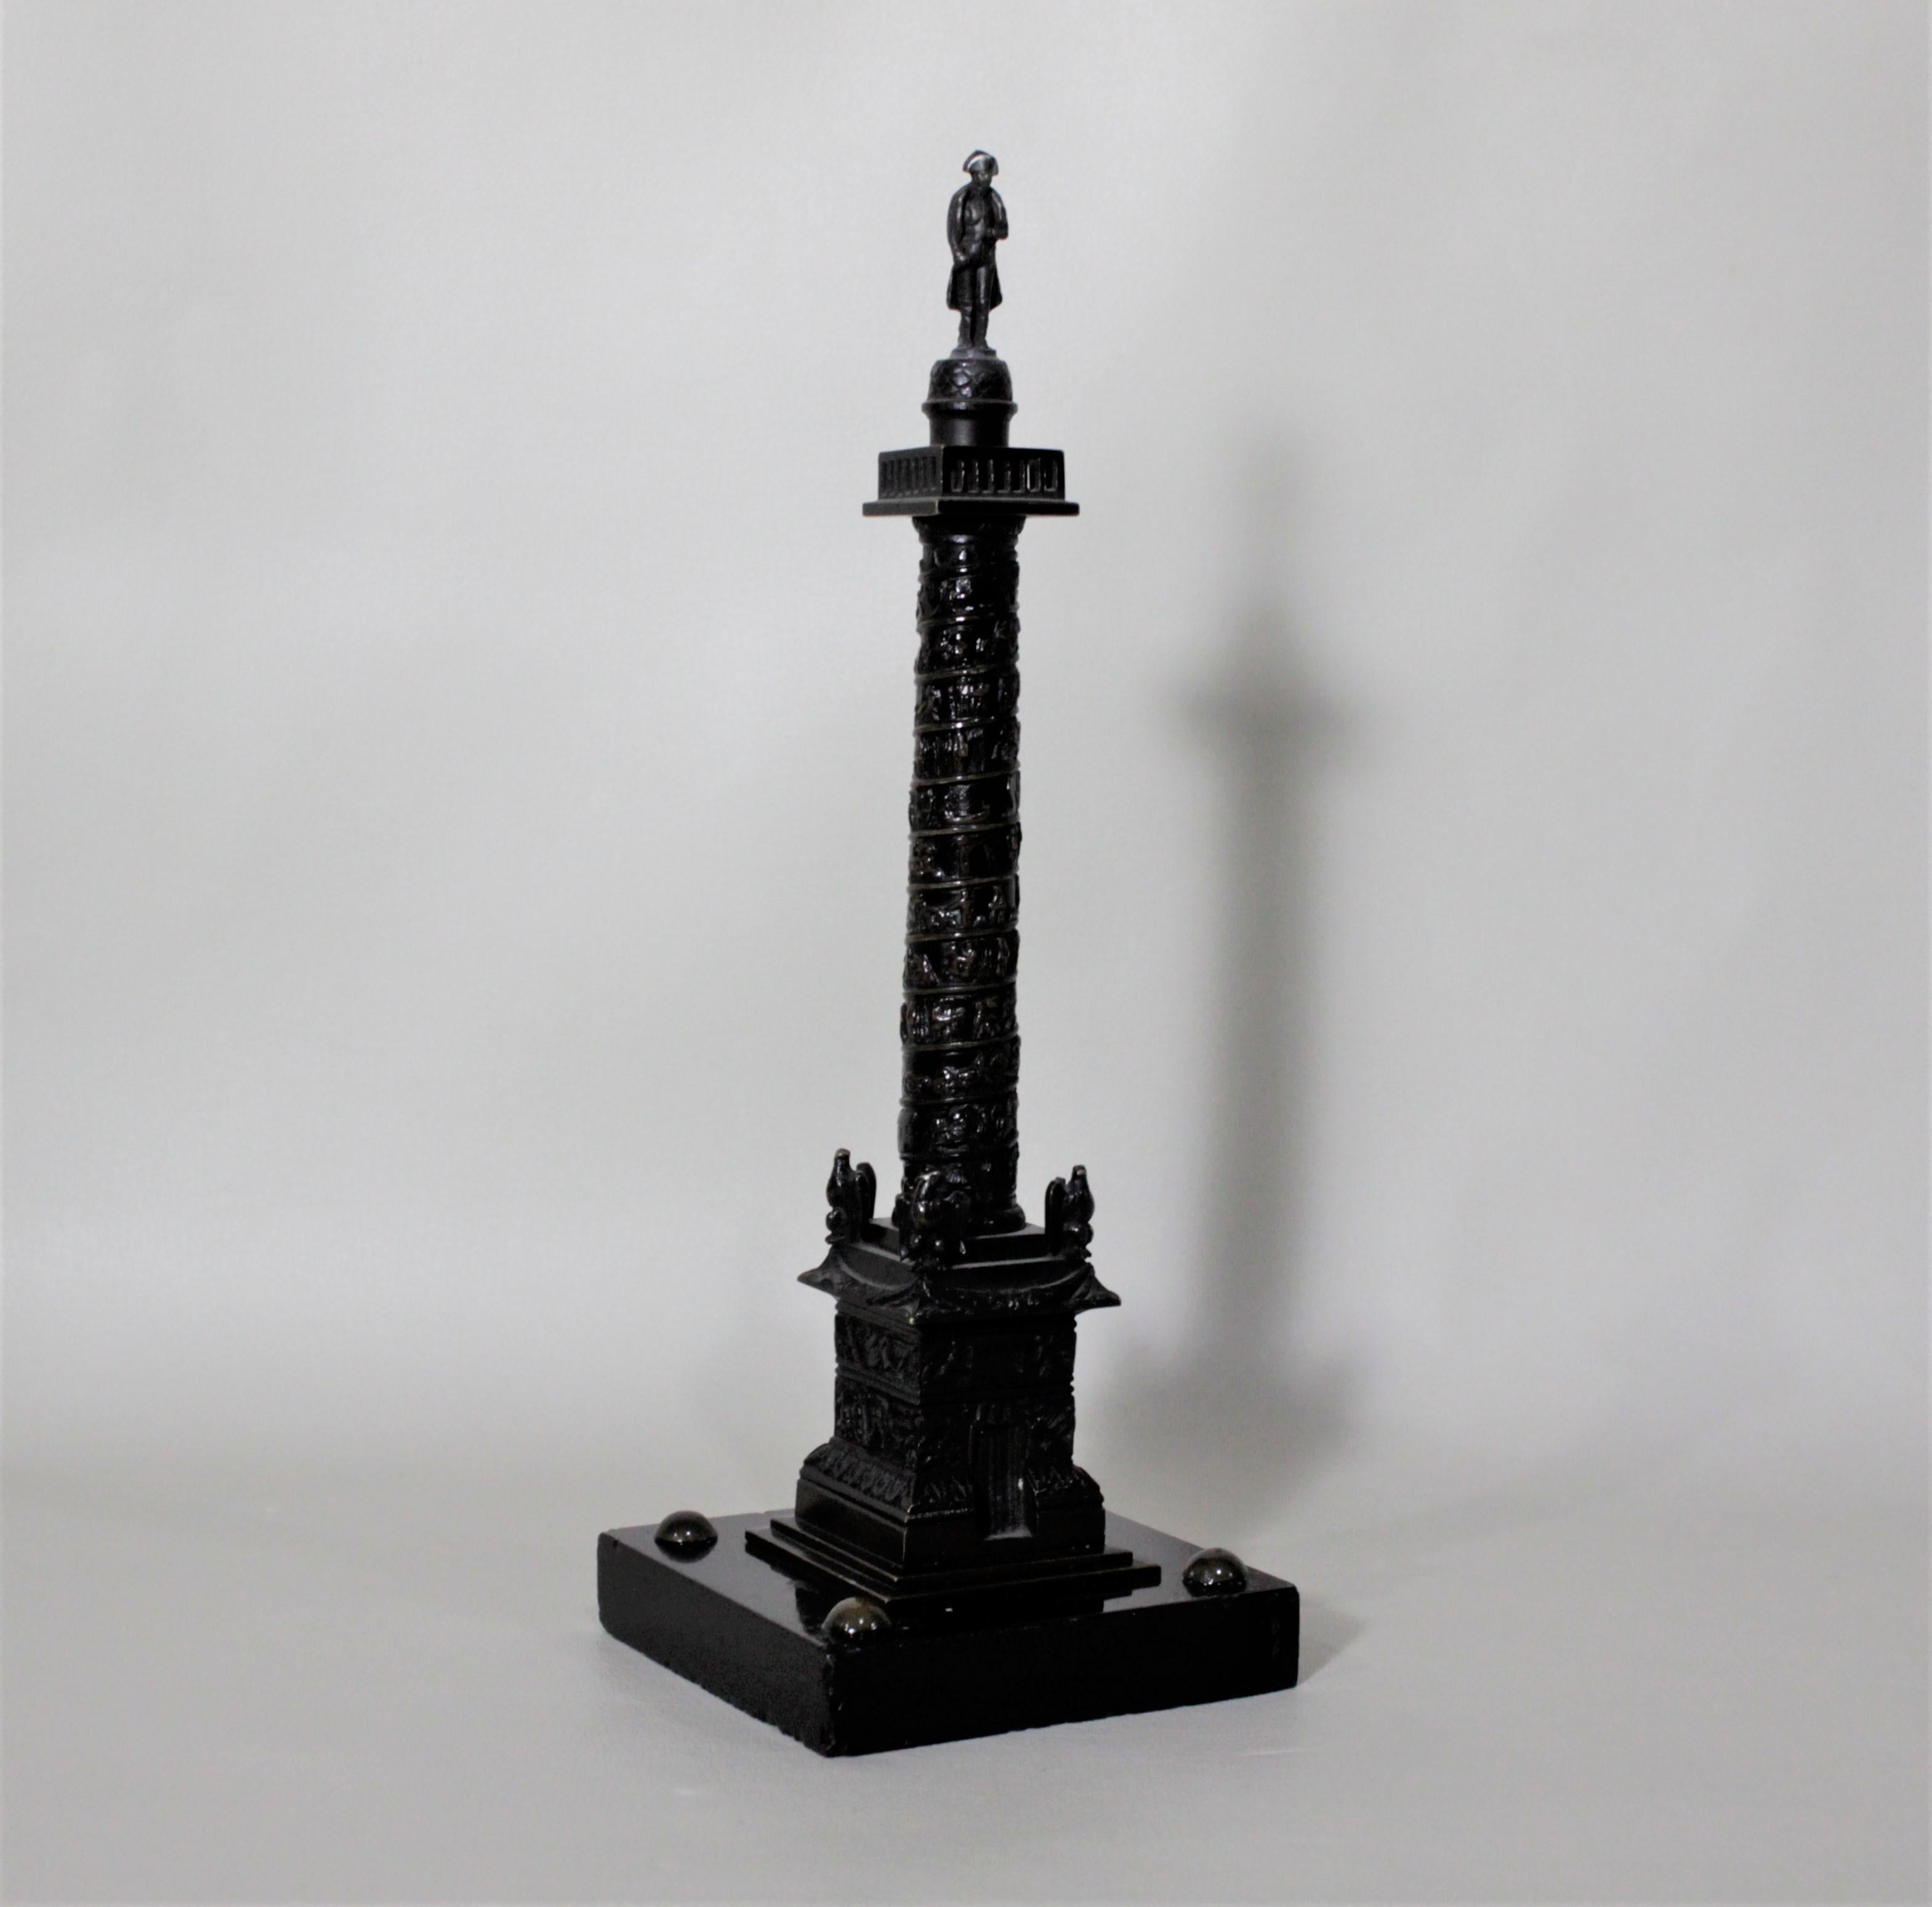 This miniature cast bronze architectural model of the Trajan Column dates to the 19th century to commemorate one of the Grand Tours of Europe. There is no foundry mark noted, but this bronze is presumed to have been cast in France. The bronze is